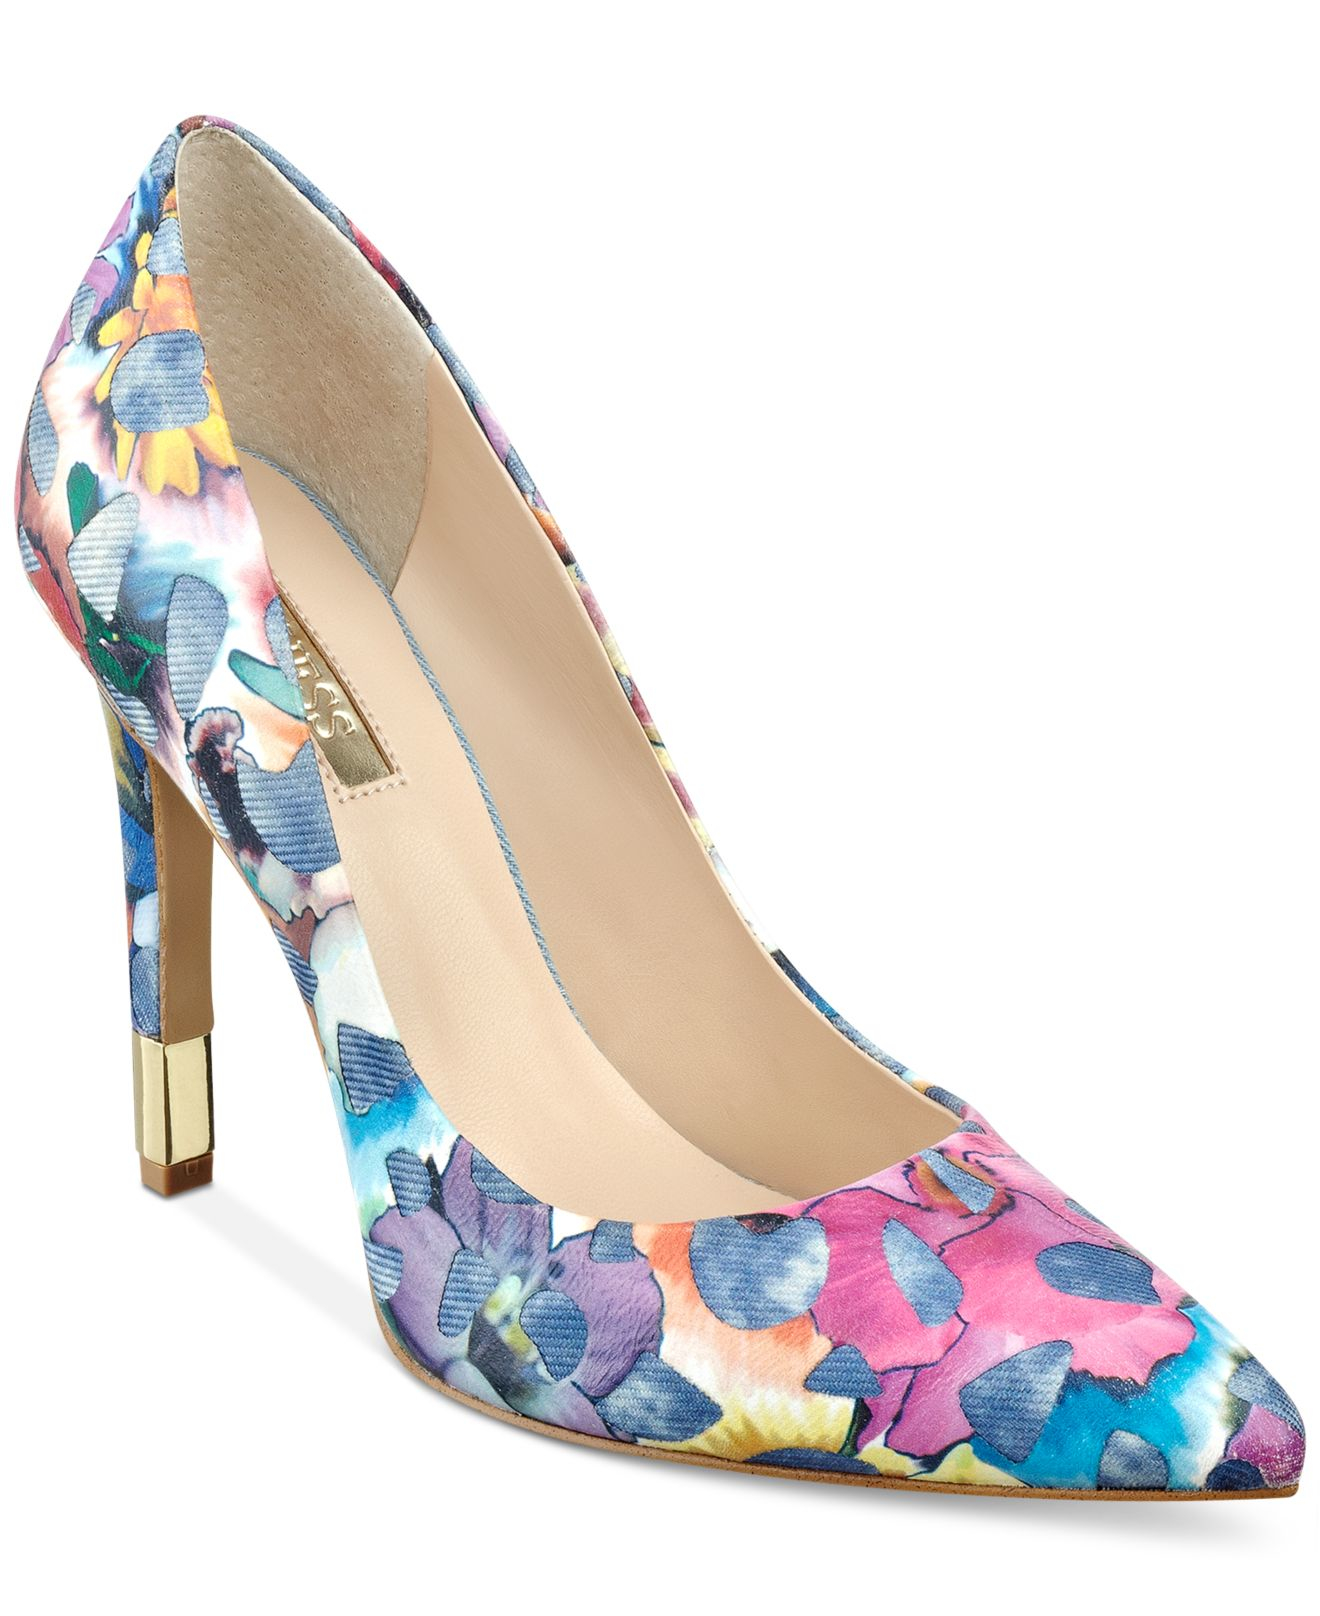 Lyst - Guess Babbitta Pointed-toe Floral-print Pumps